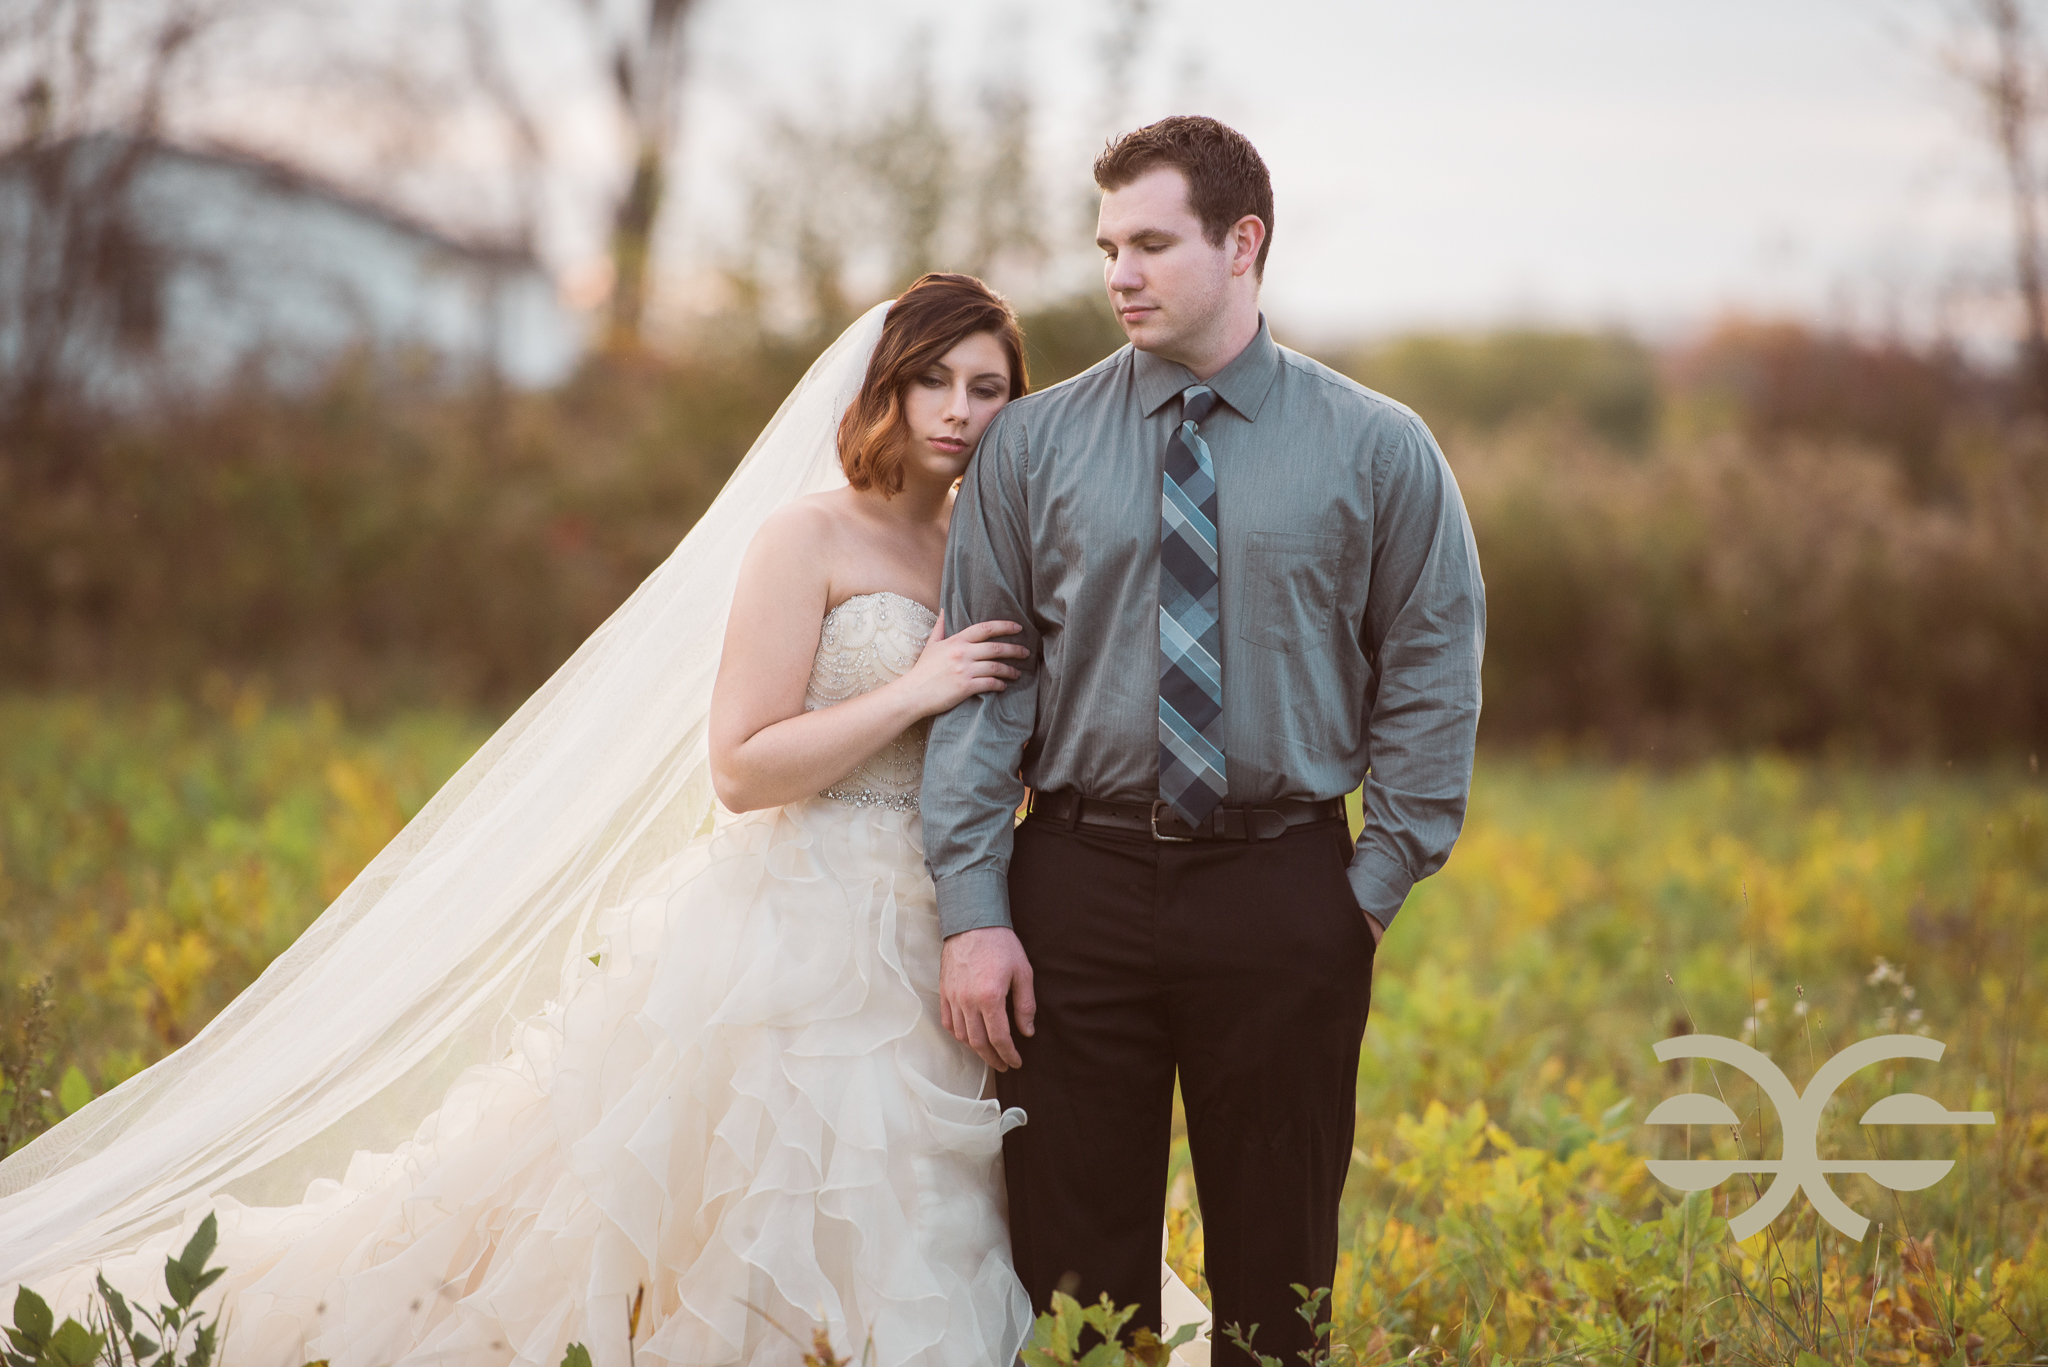 A bride and groom on their wedding day in Buffalo, NY